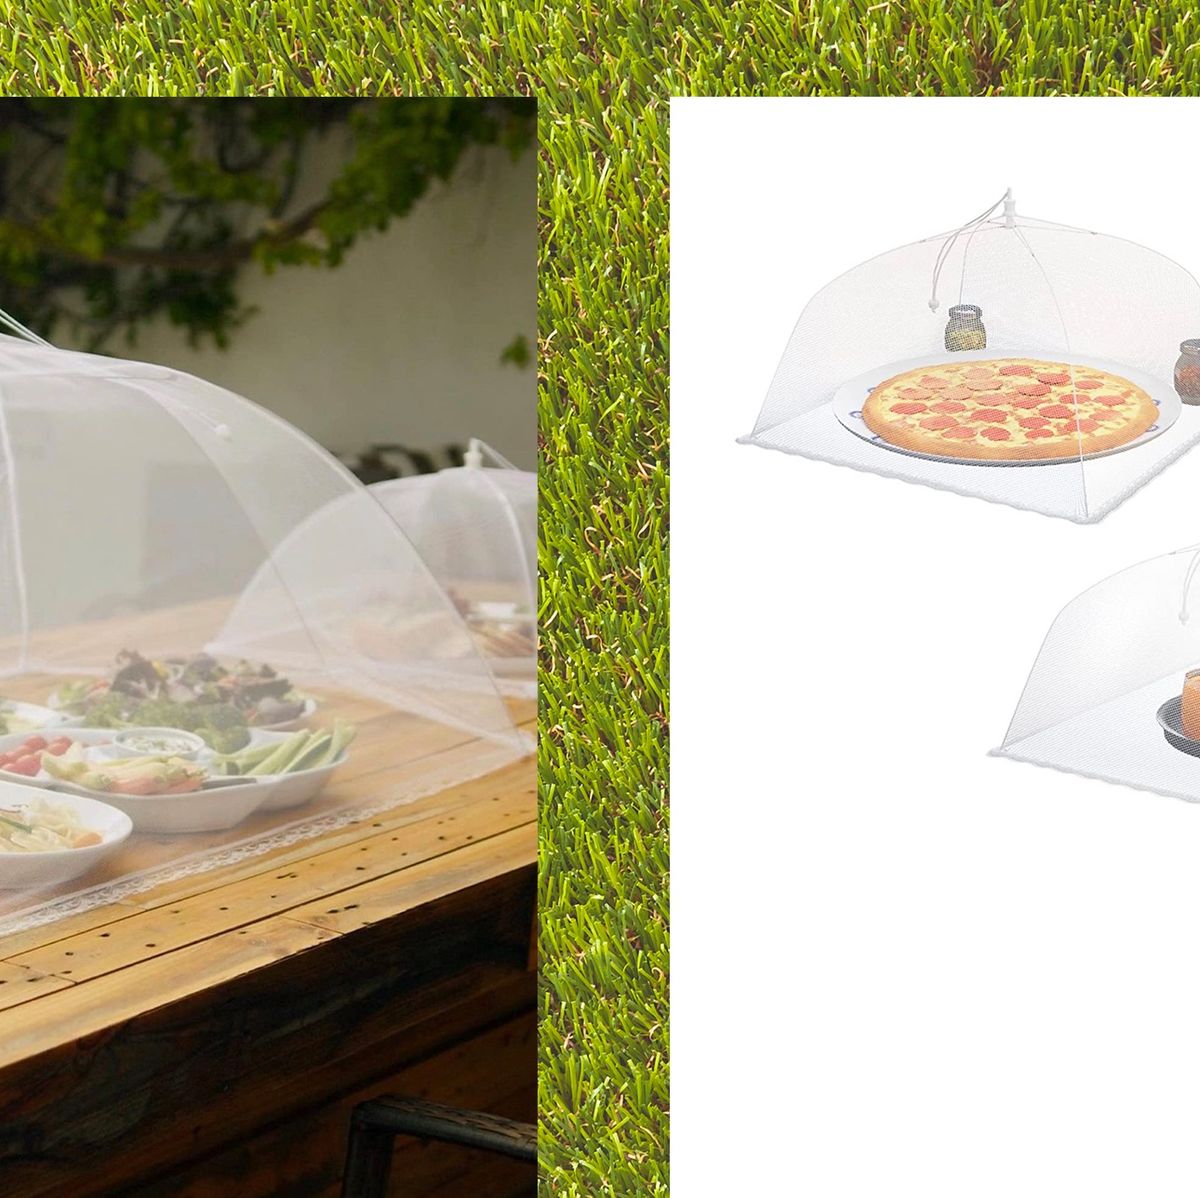 Best Food Covers for Outdoor Dining